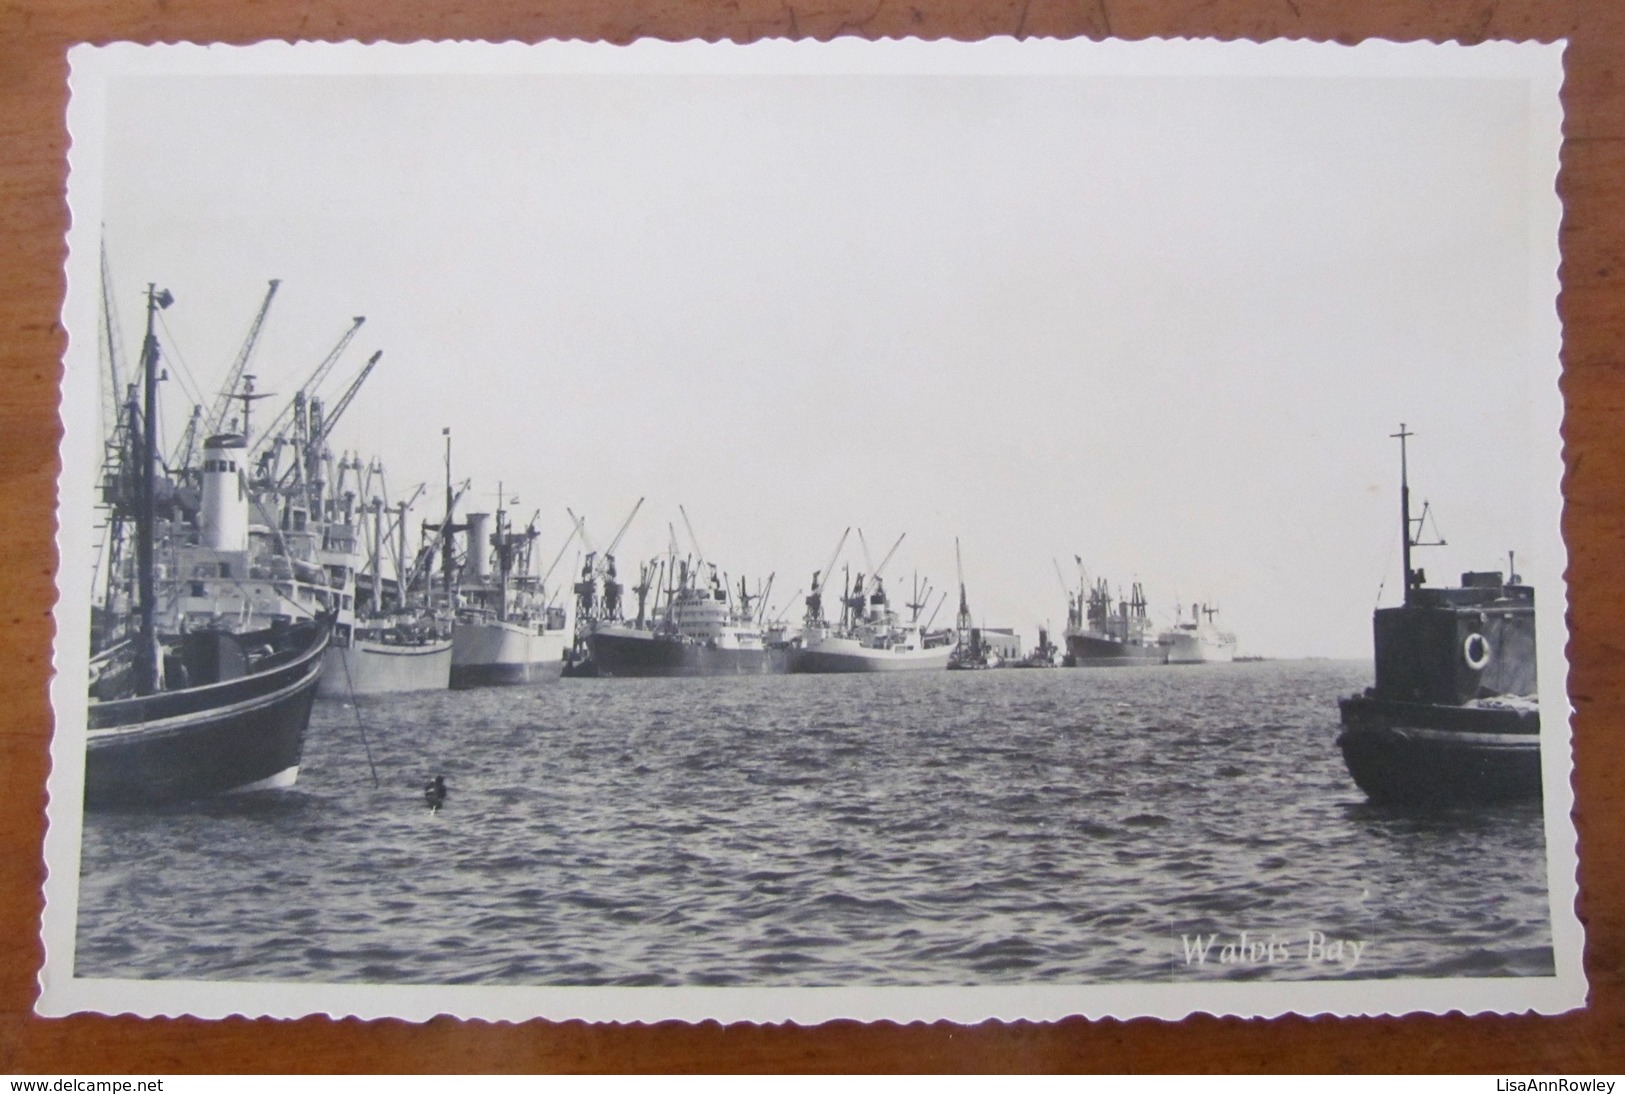 SOUTH WEST AFRICA=WALVIS BAY=REAL PHOTO POSTCARD=SHIPS IN THE HARBOUR. - Namibia